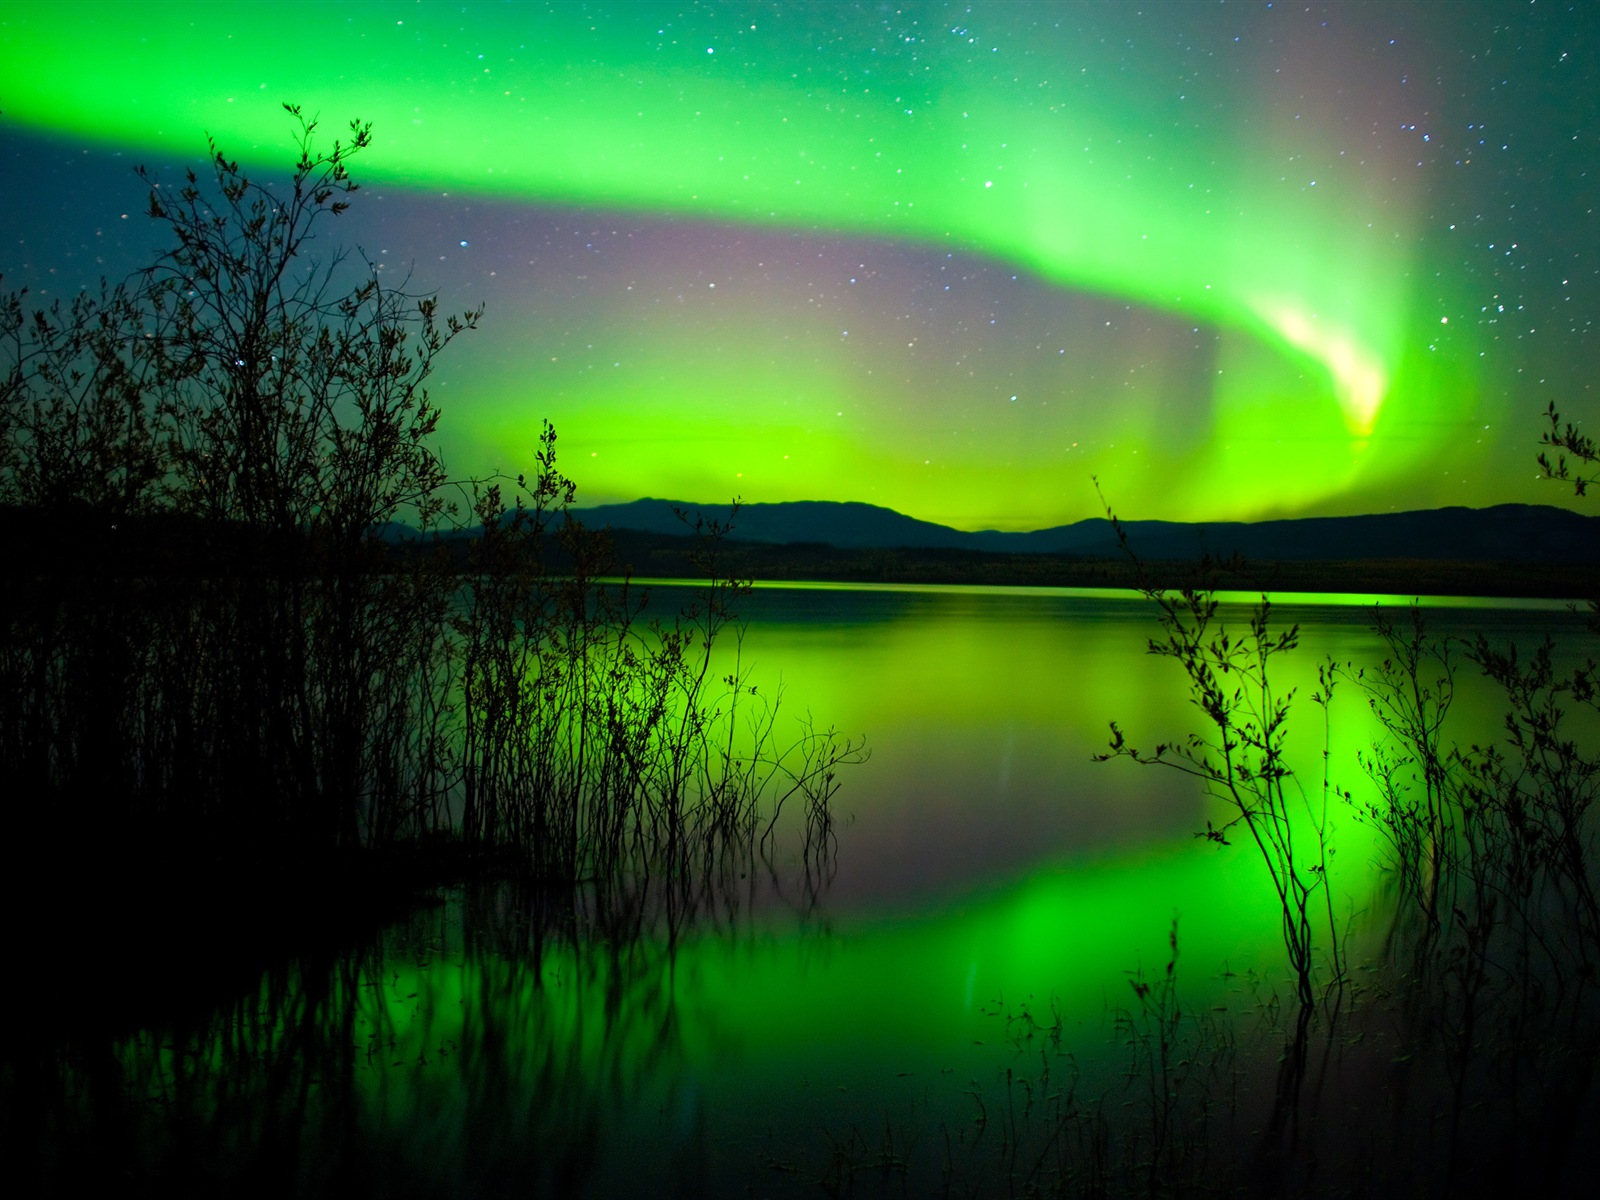 Natural wonders of the Northern Lights HD Wallpaper (2) #12 - 1600x1200